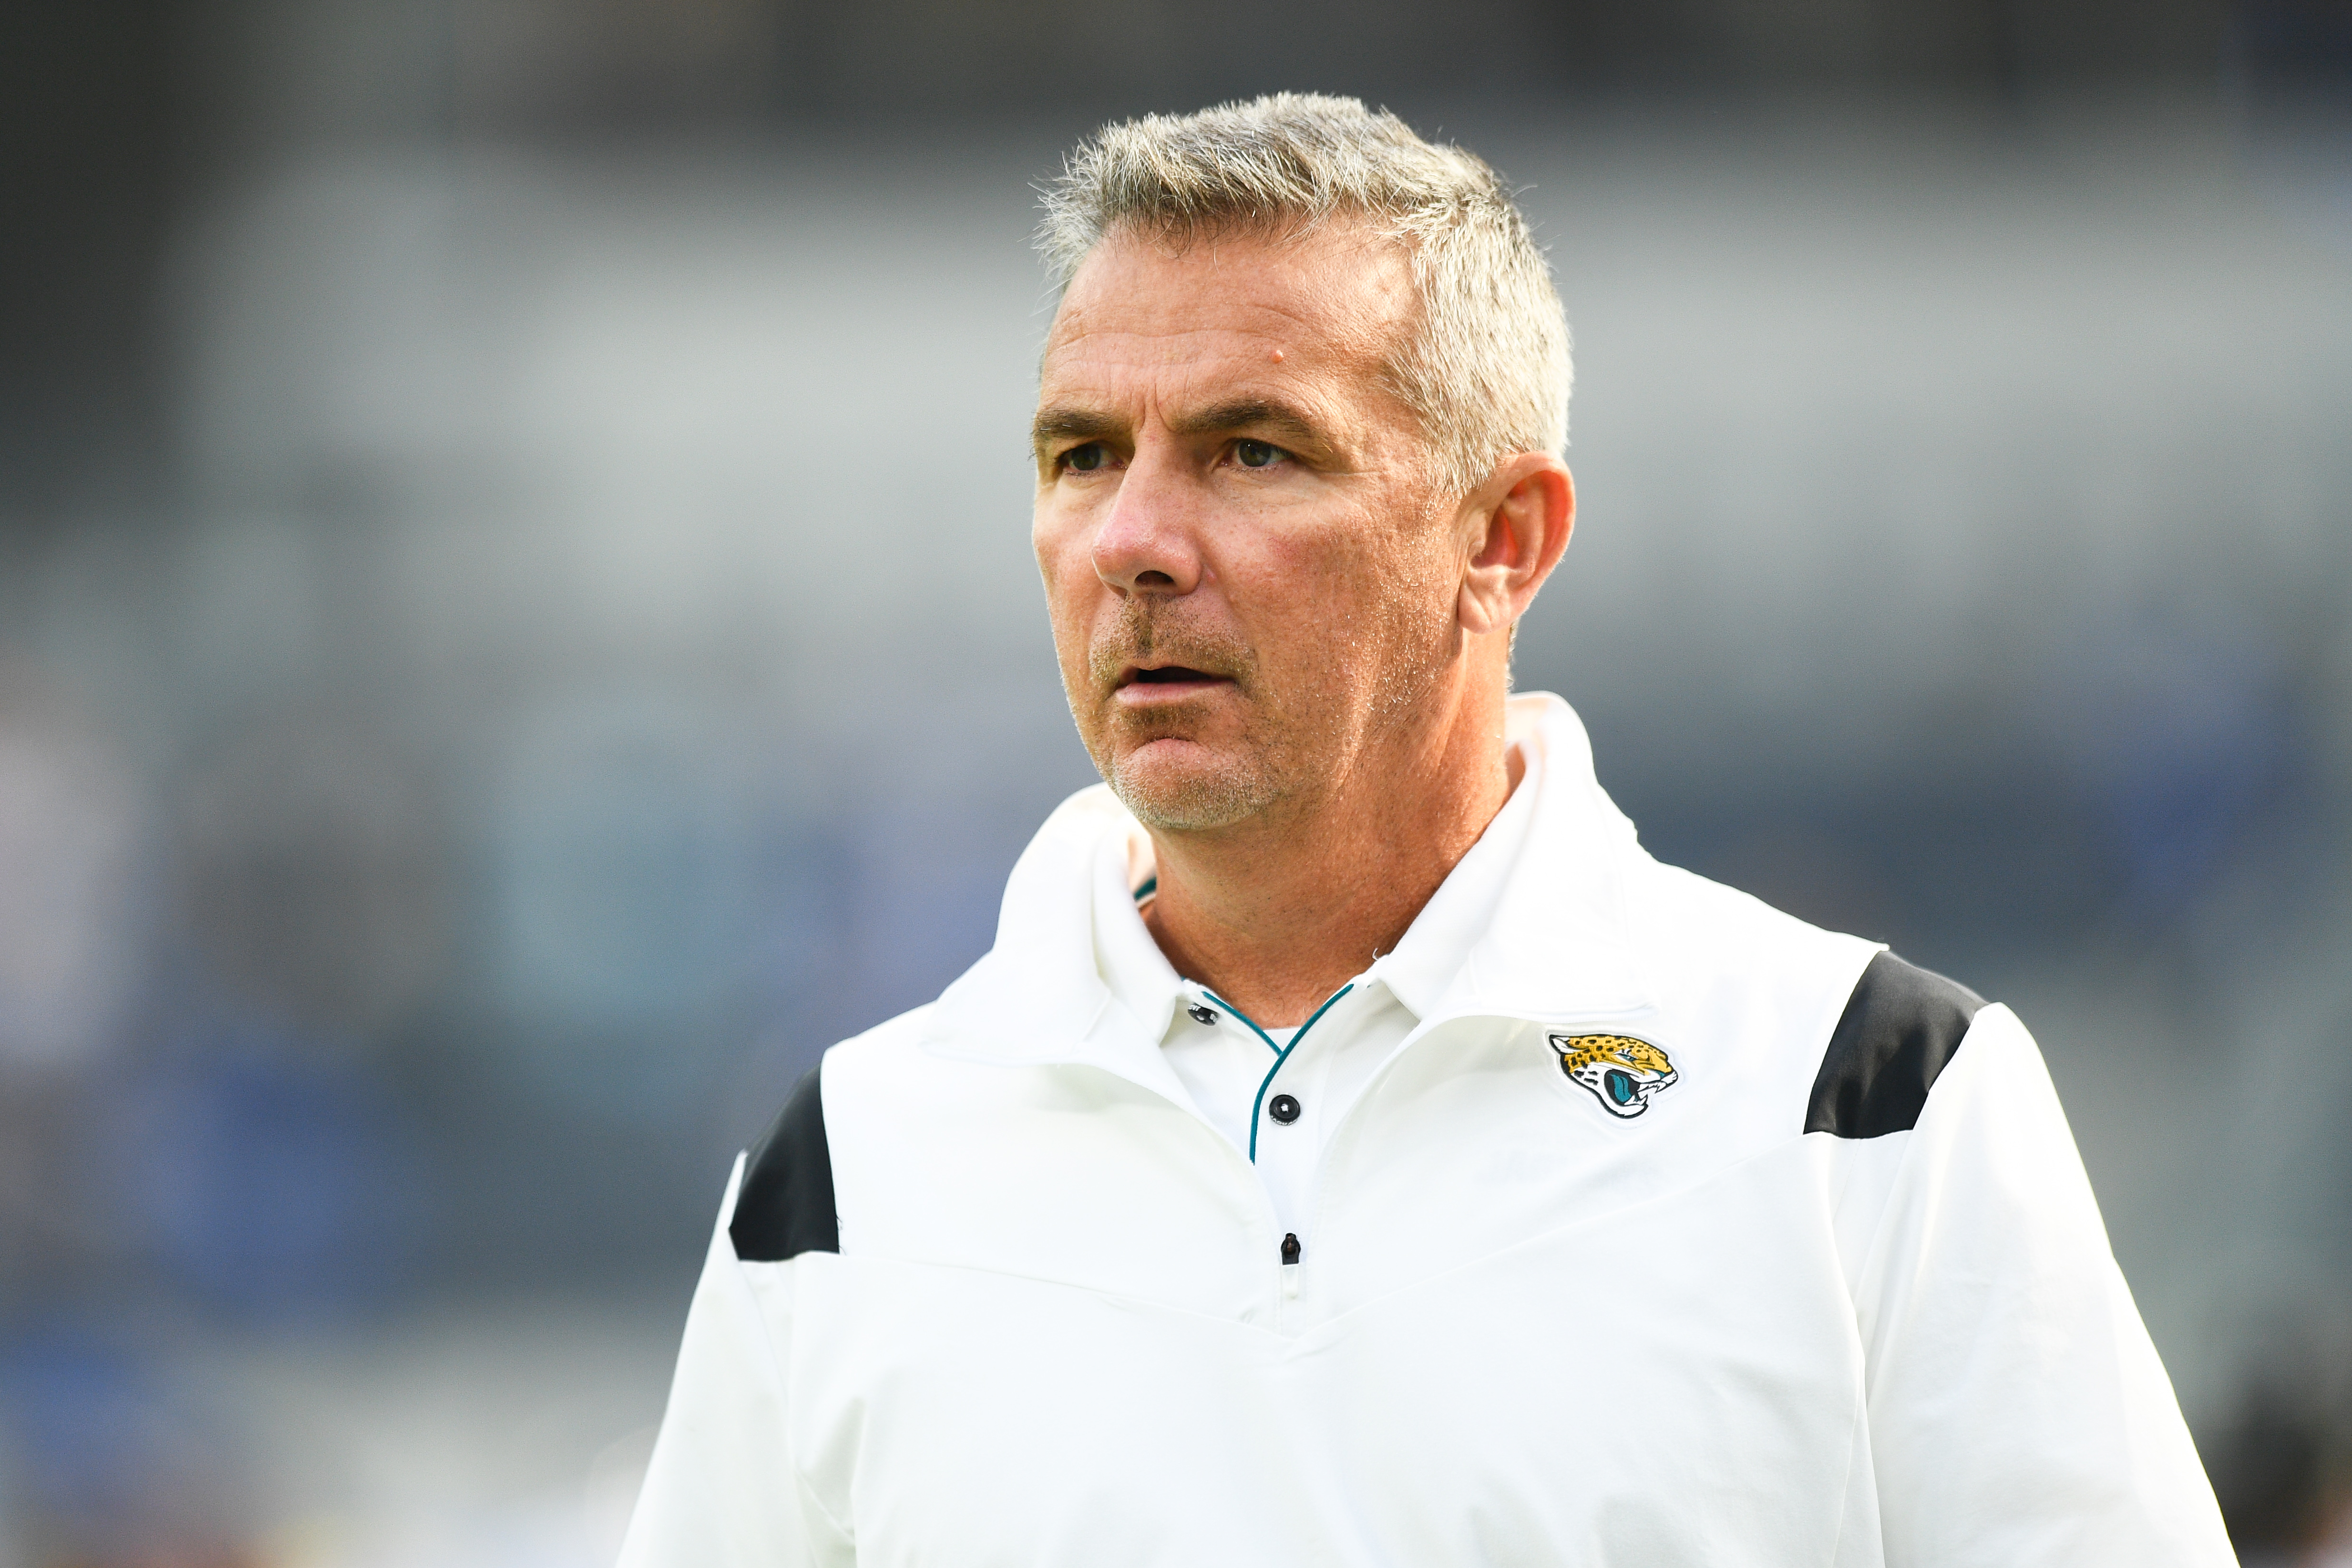 Jaguars Owner Shad Khan on Urban Meyer: 'I Want to Do the Right Thing for the Te..